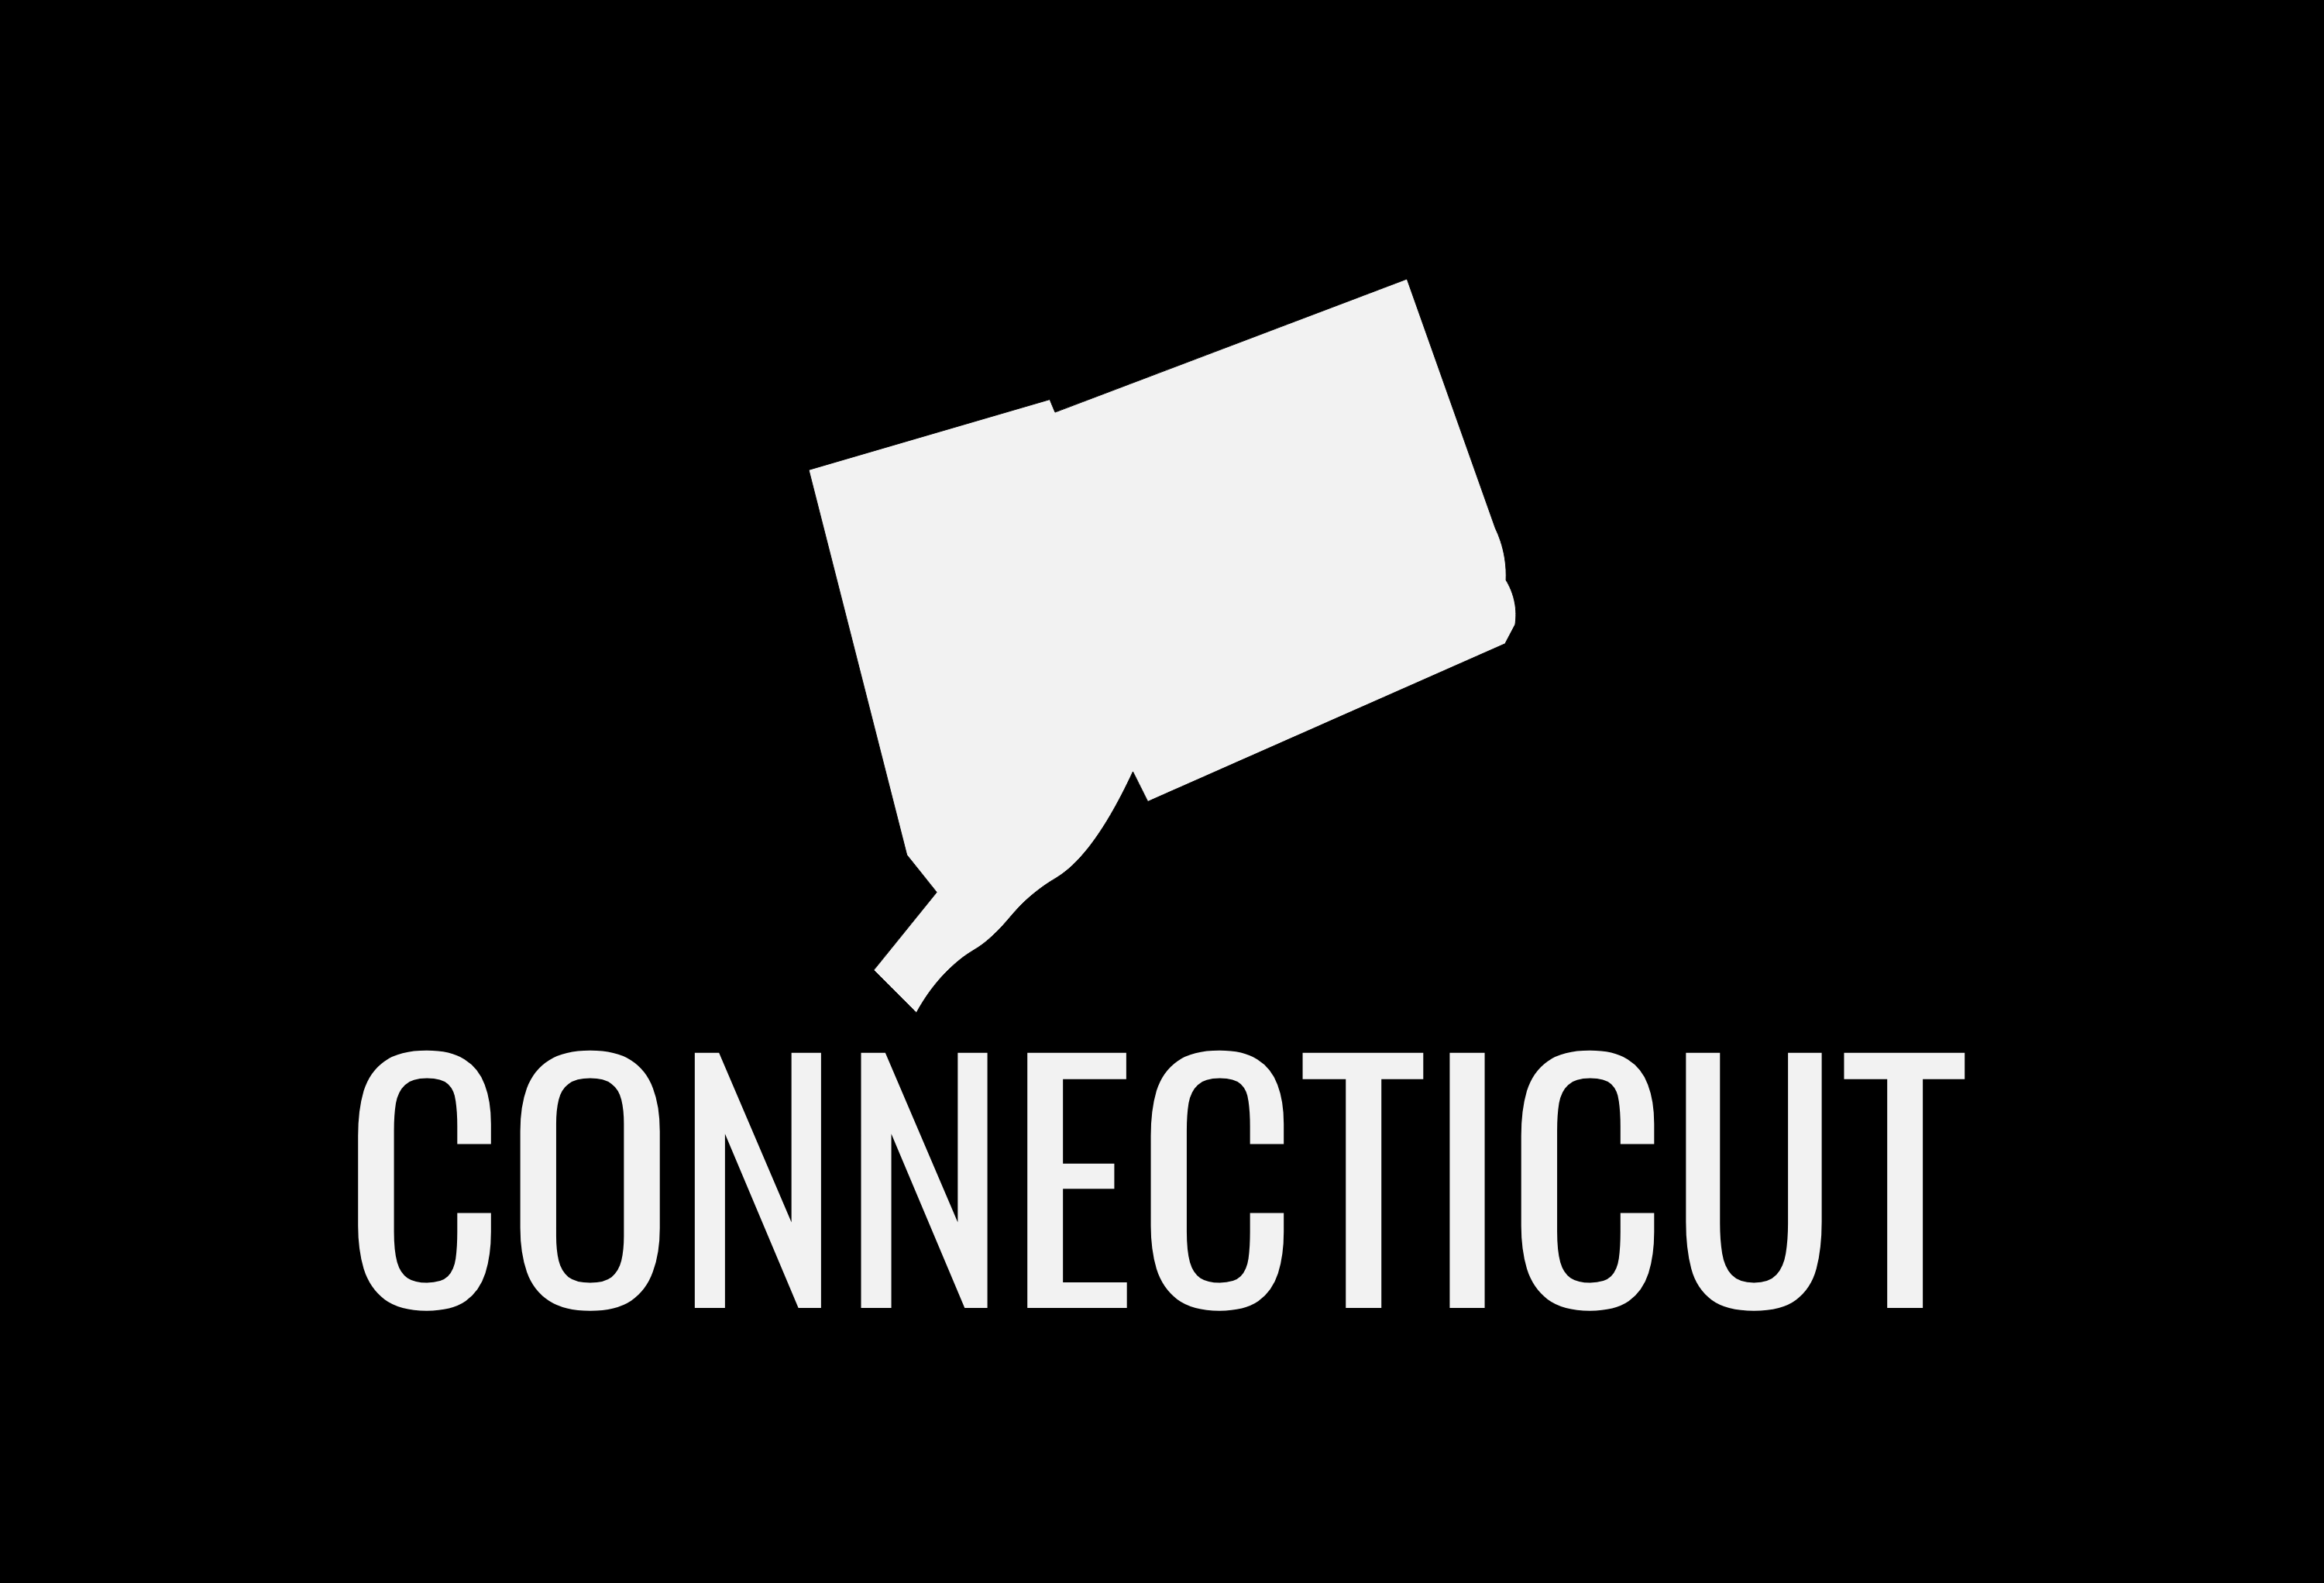 Connecticut State Map Car Decal - Permanent Vinyl Sticker for Cars, Vehicle, Doors, Windows, Laptop, and more!